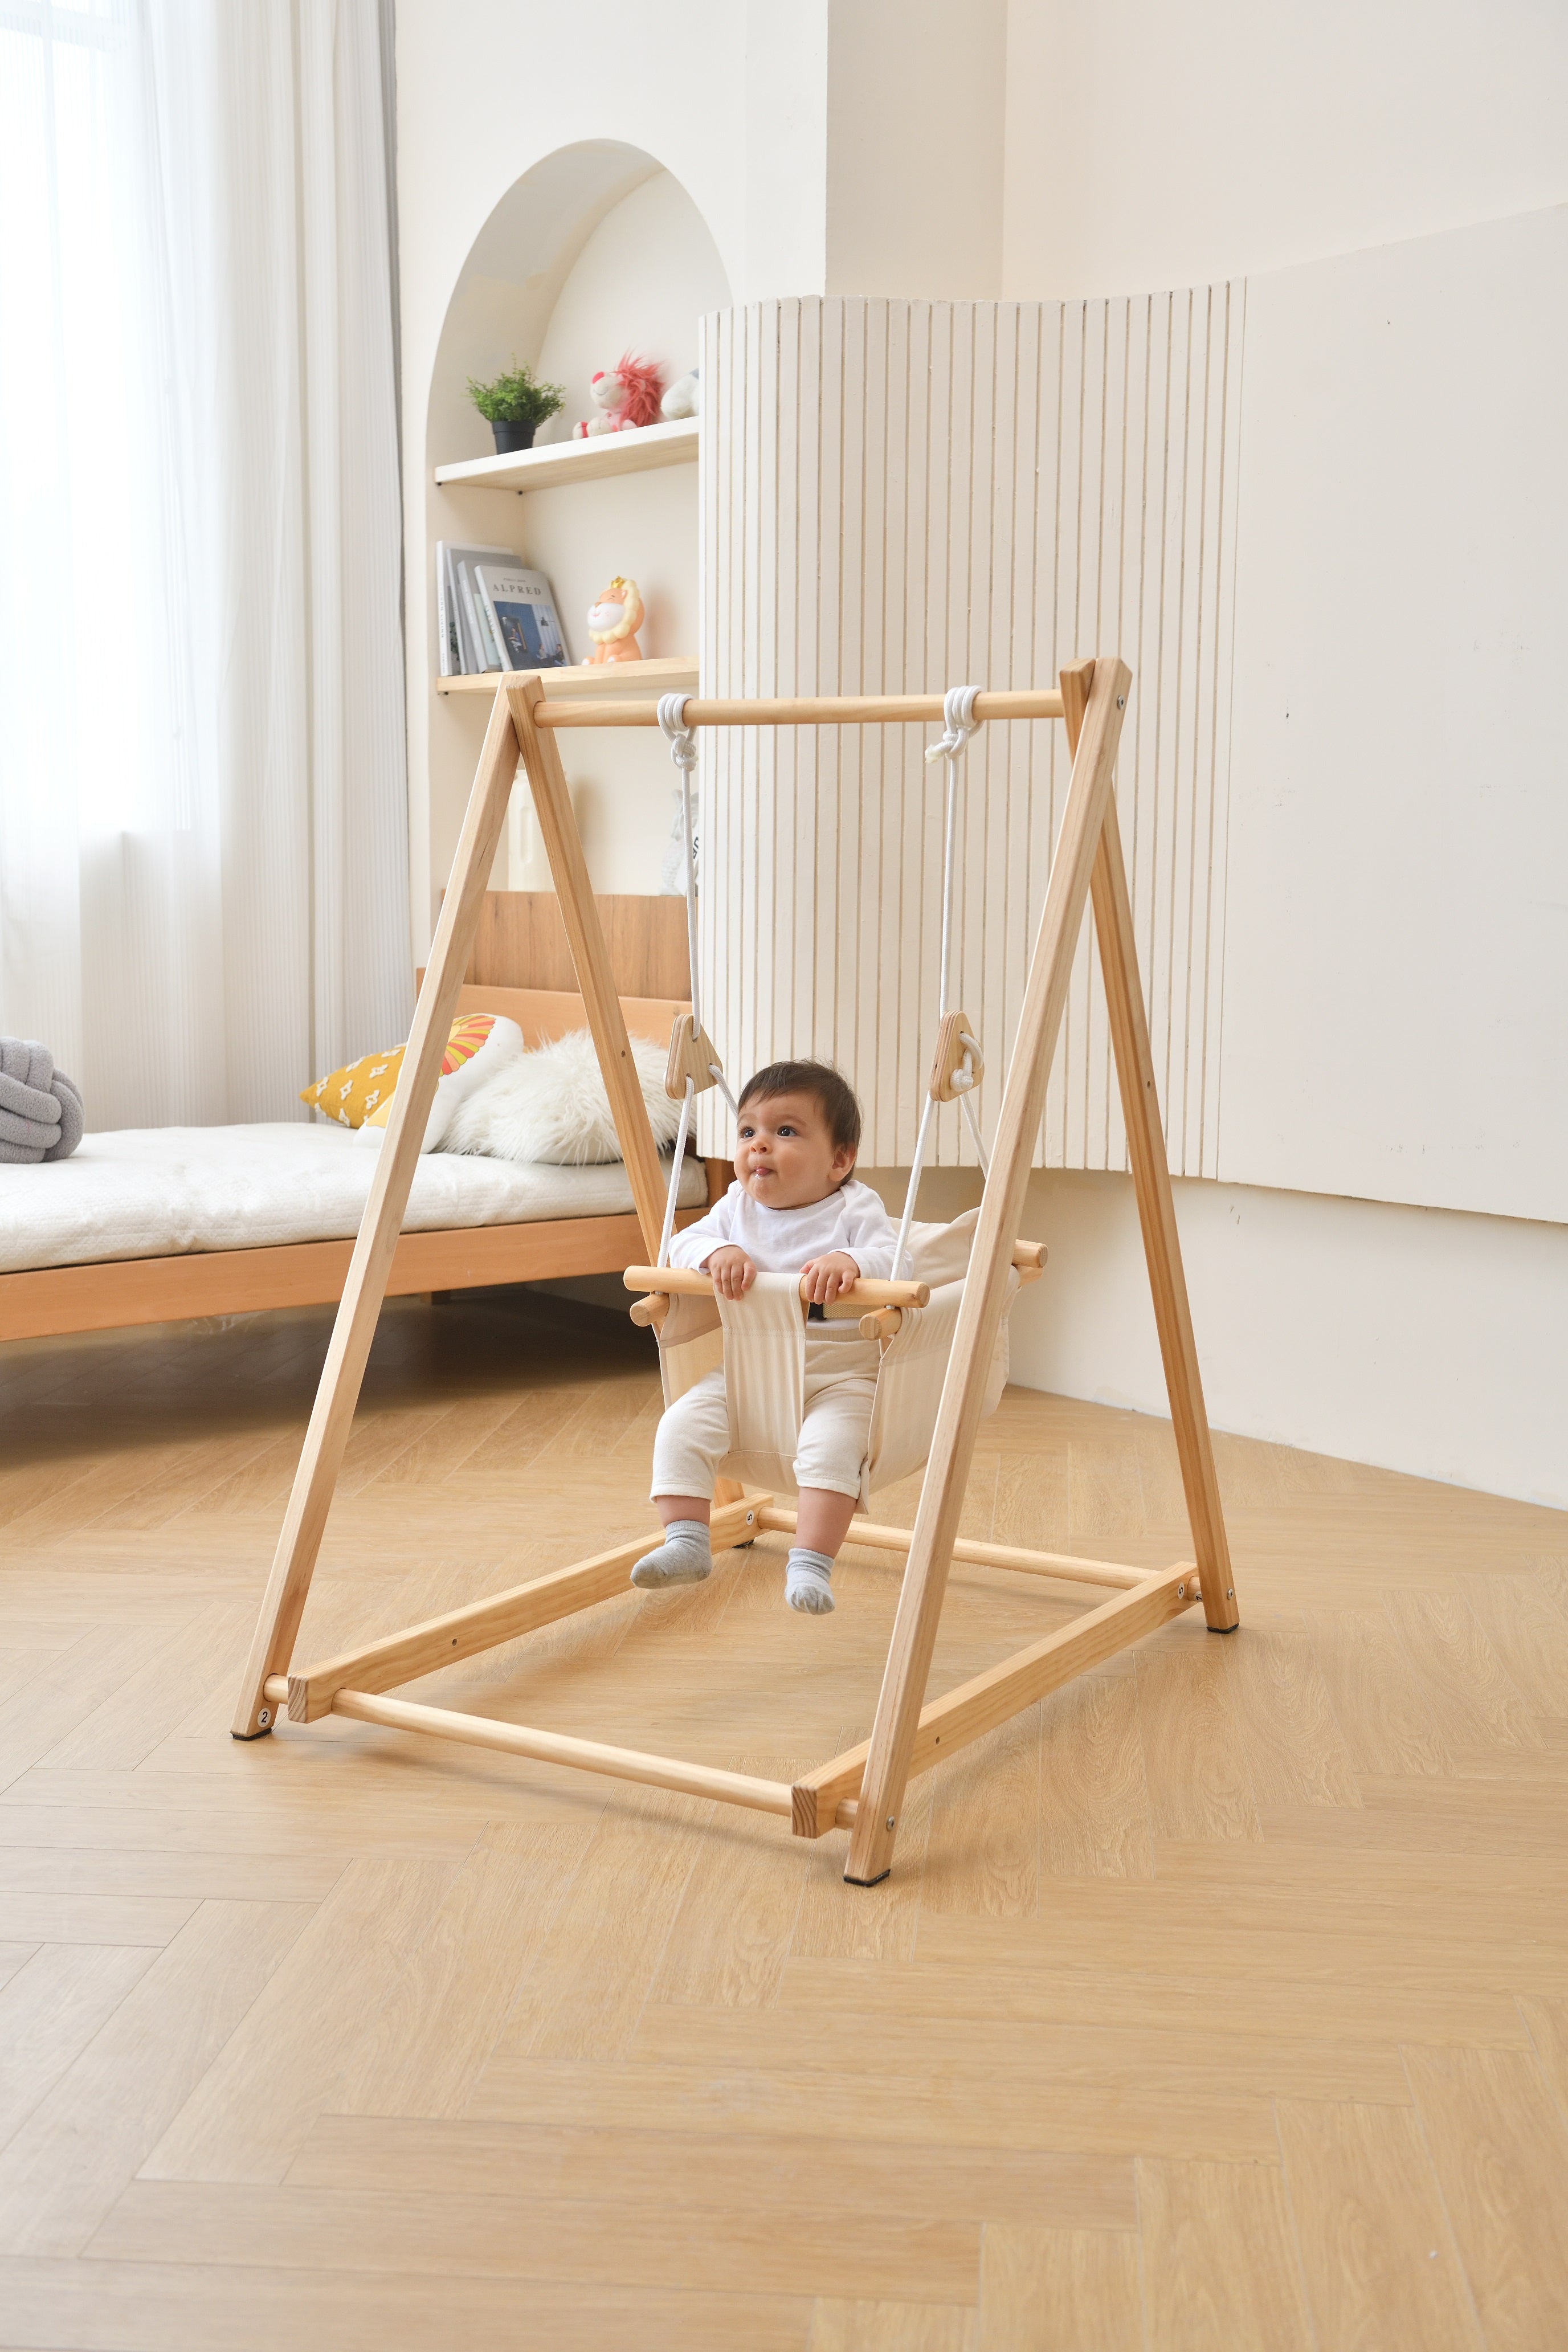 Spruce - Baby and Toddler Foldable Wooden Swing Set